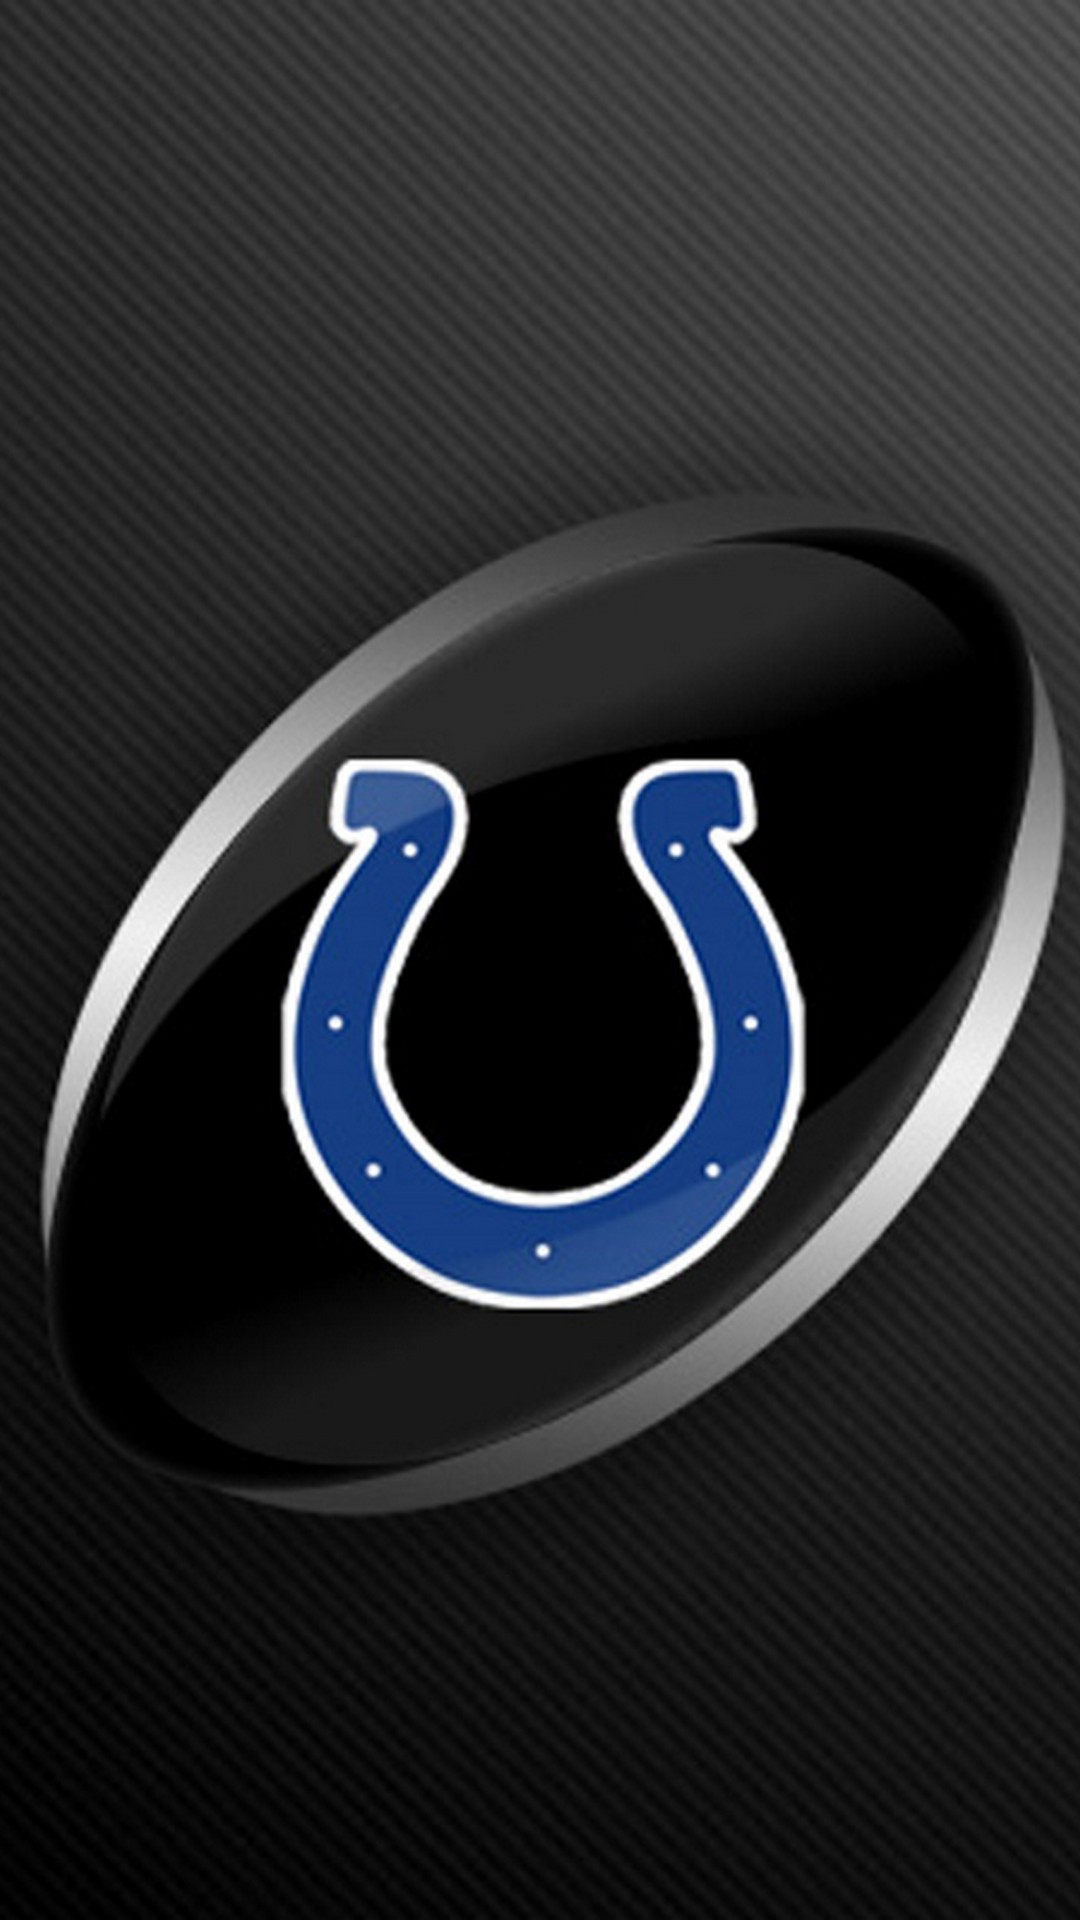 Indianapolis Colts iPhone XS Wallpaper with high-resolution 1080x1920 pixel. Download and set as wallpaper for Desktop Computer, Apple iPhone X, XS Max, XR, 8, 7, 6, SE, iPad, Android